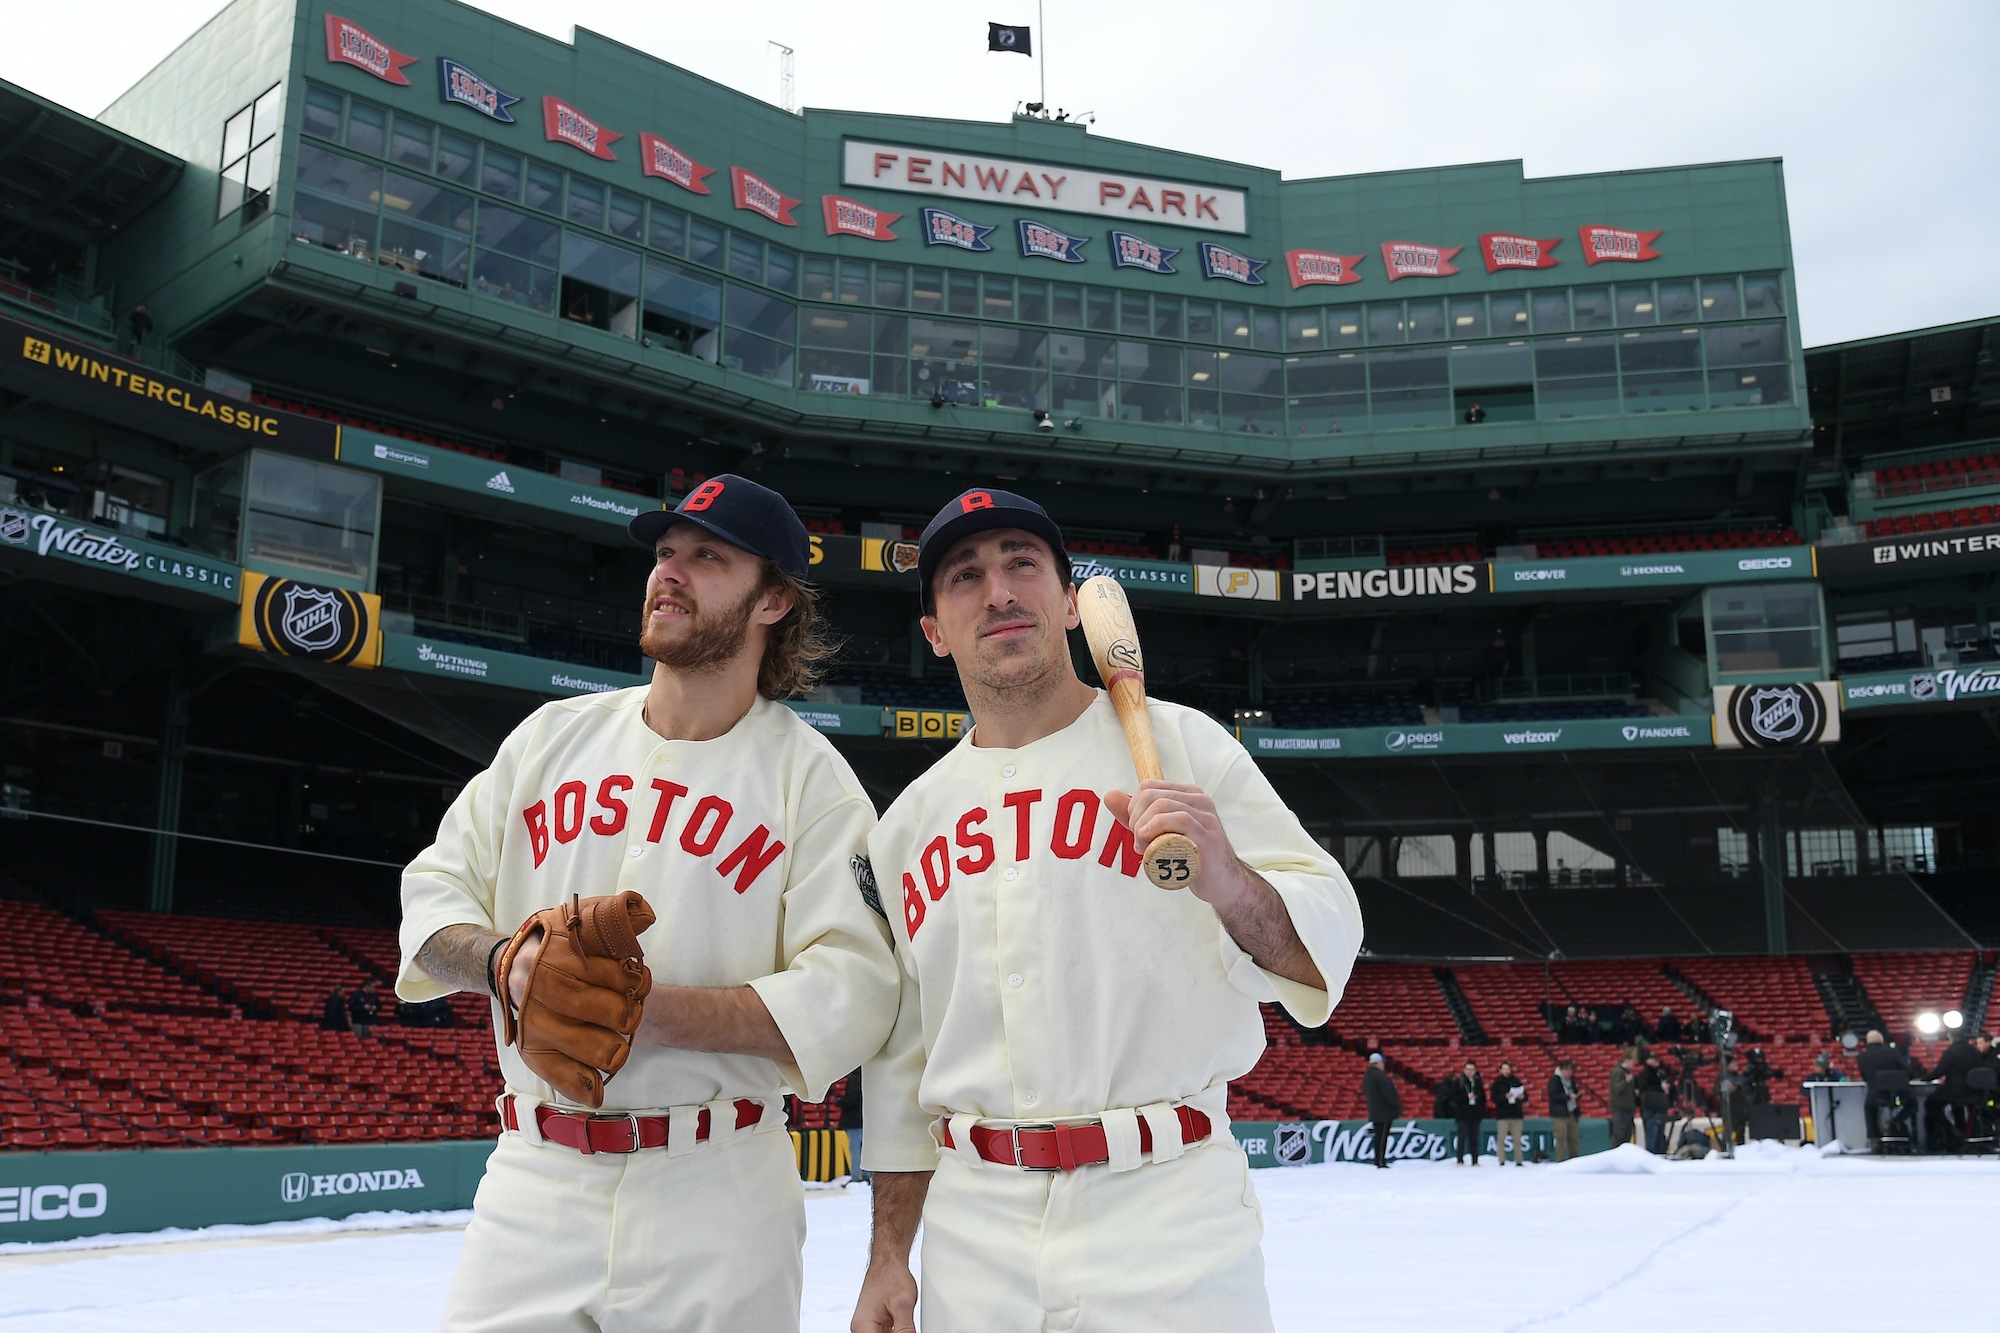 David Pastrnak #88 and Brad Marchand #63 of the Boston Bruins poses for a photo before the game against the Pittsburgh Penguins at the 2023 Discover NHL Winter Classic at Fenway Park on January 2, 2023 in Boston.